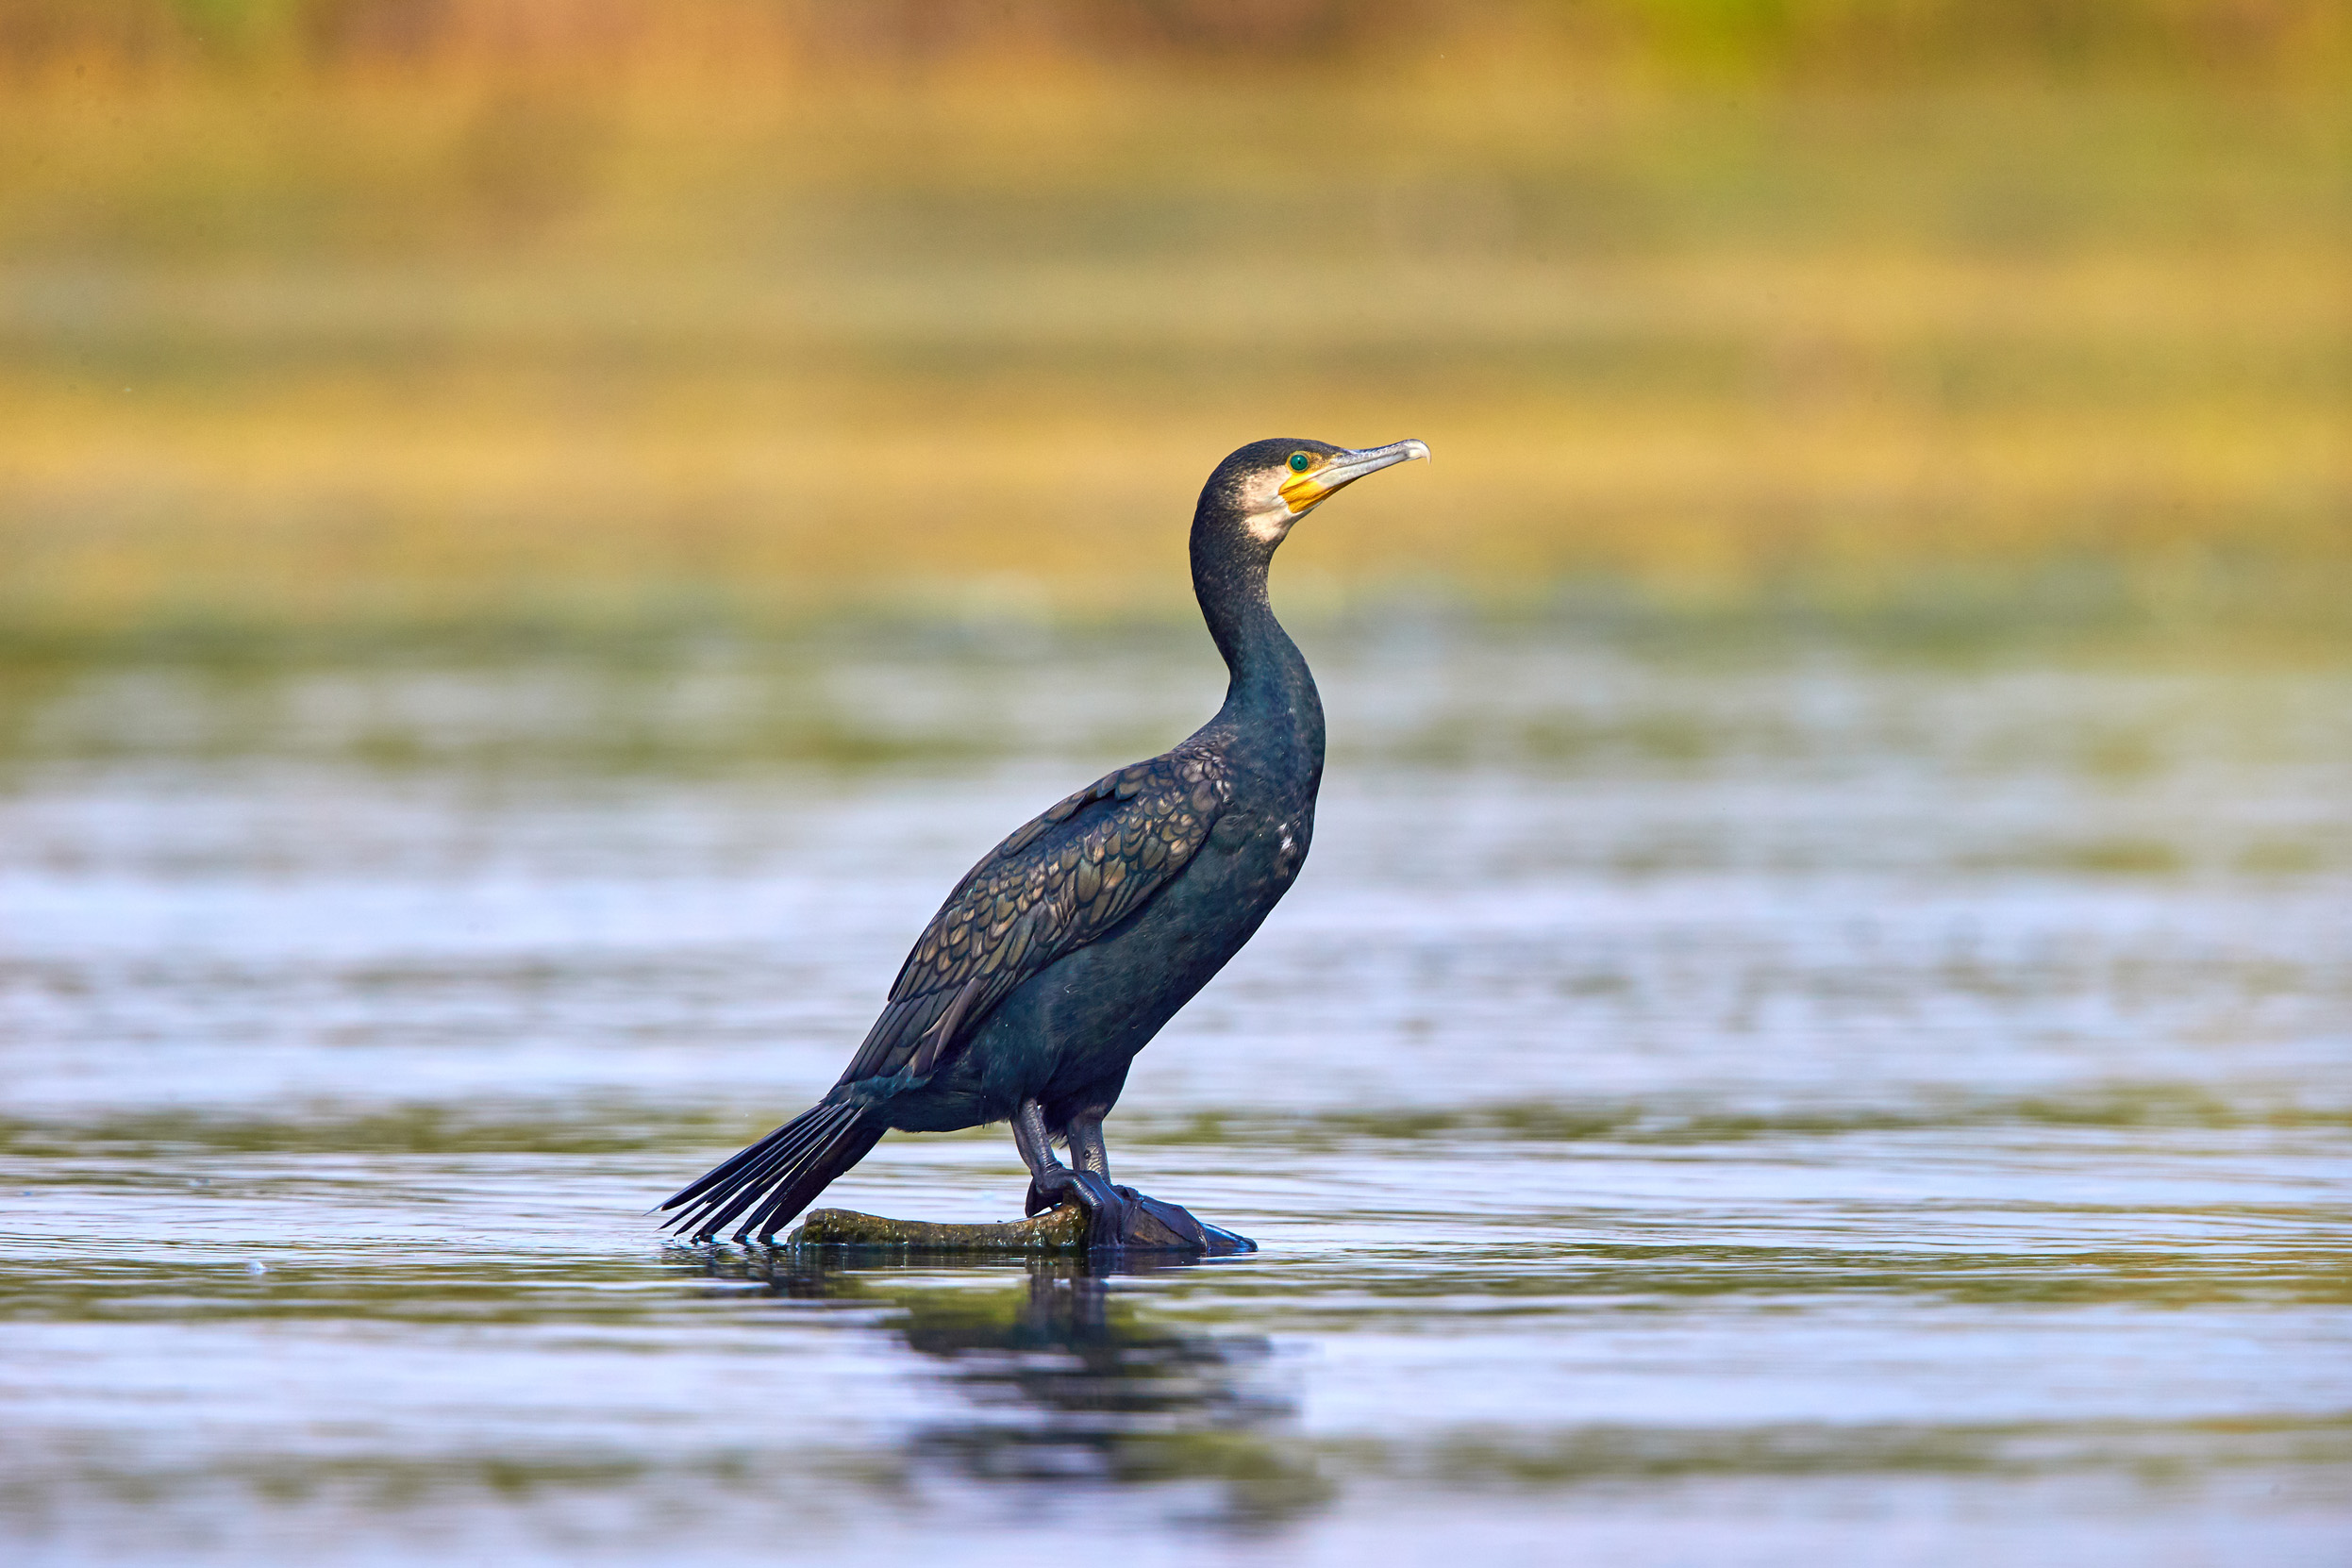 Cormorant standing on a rock in a body of water.